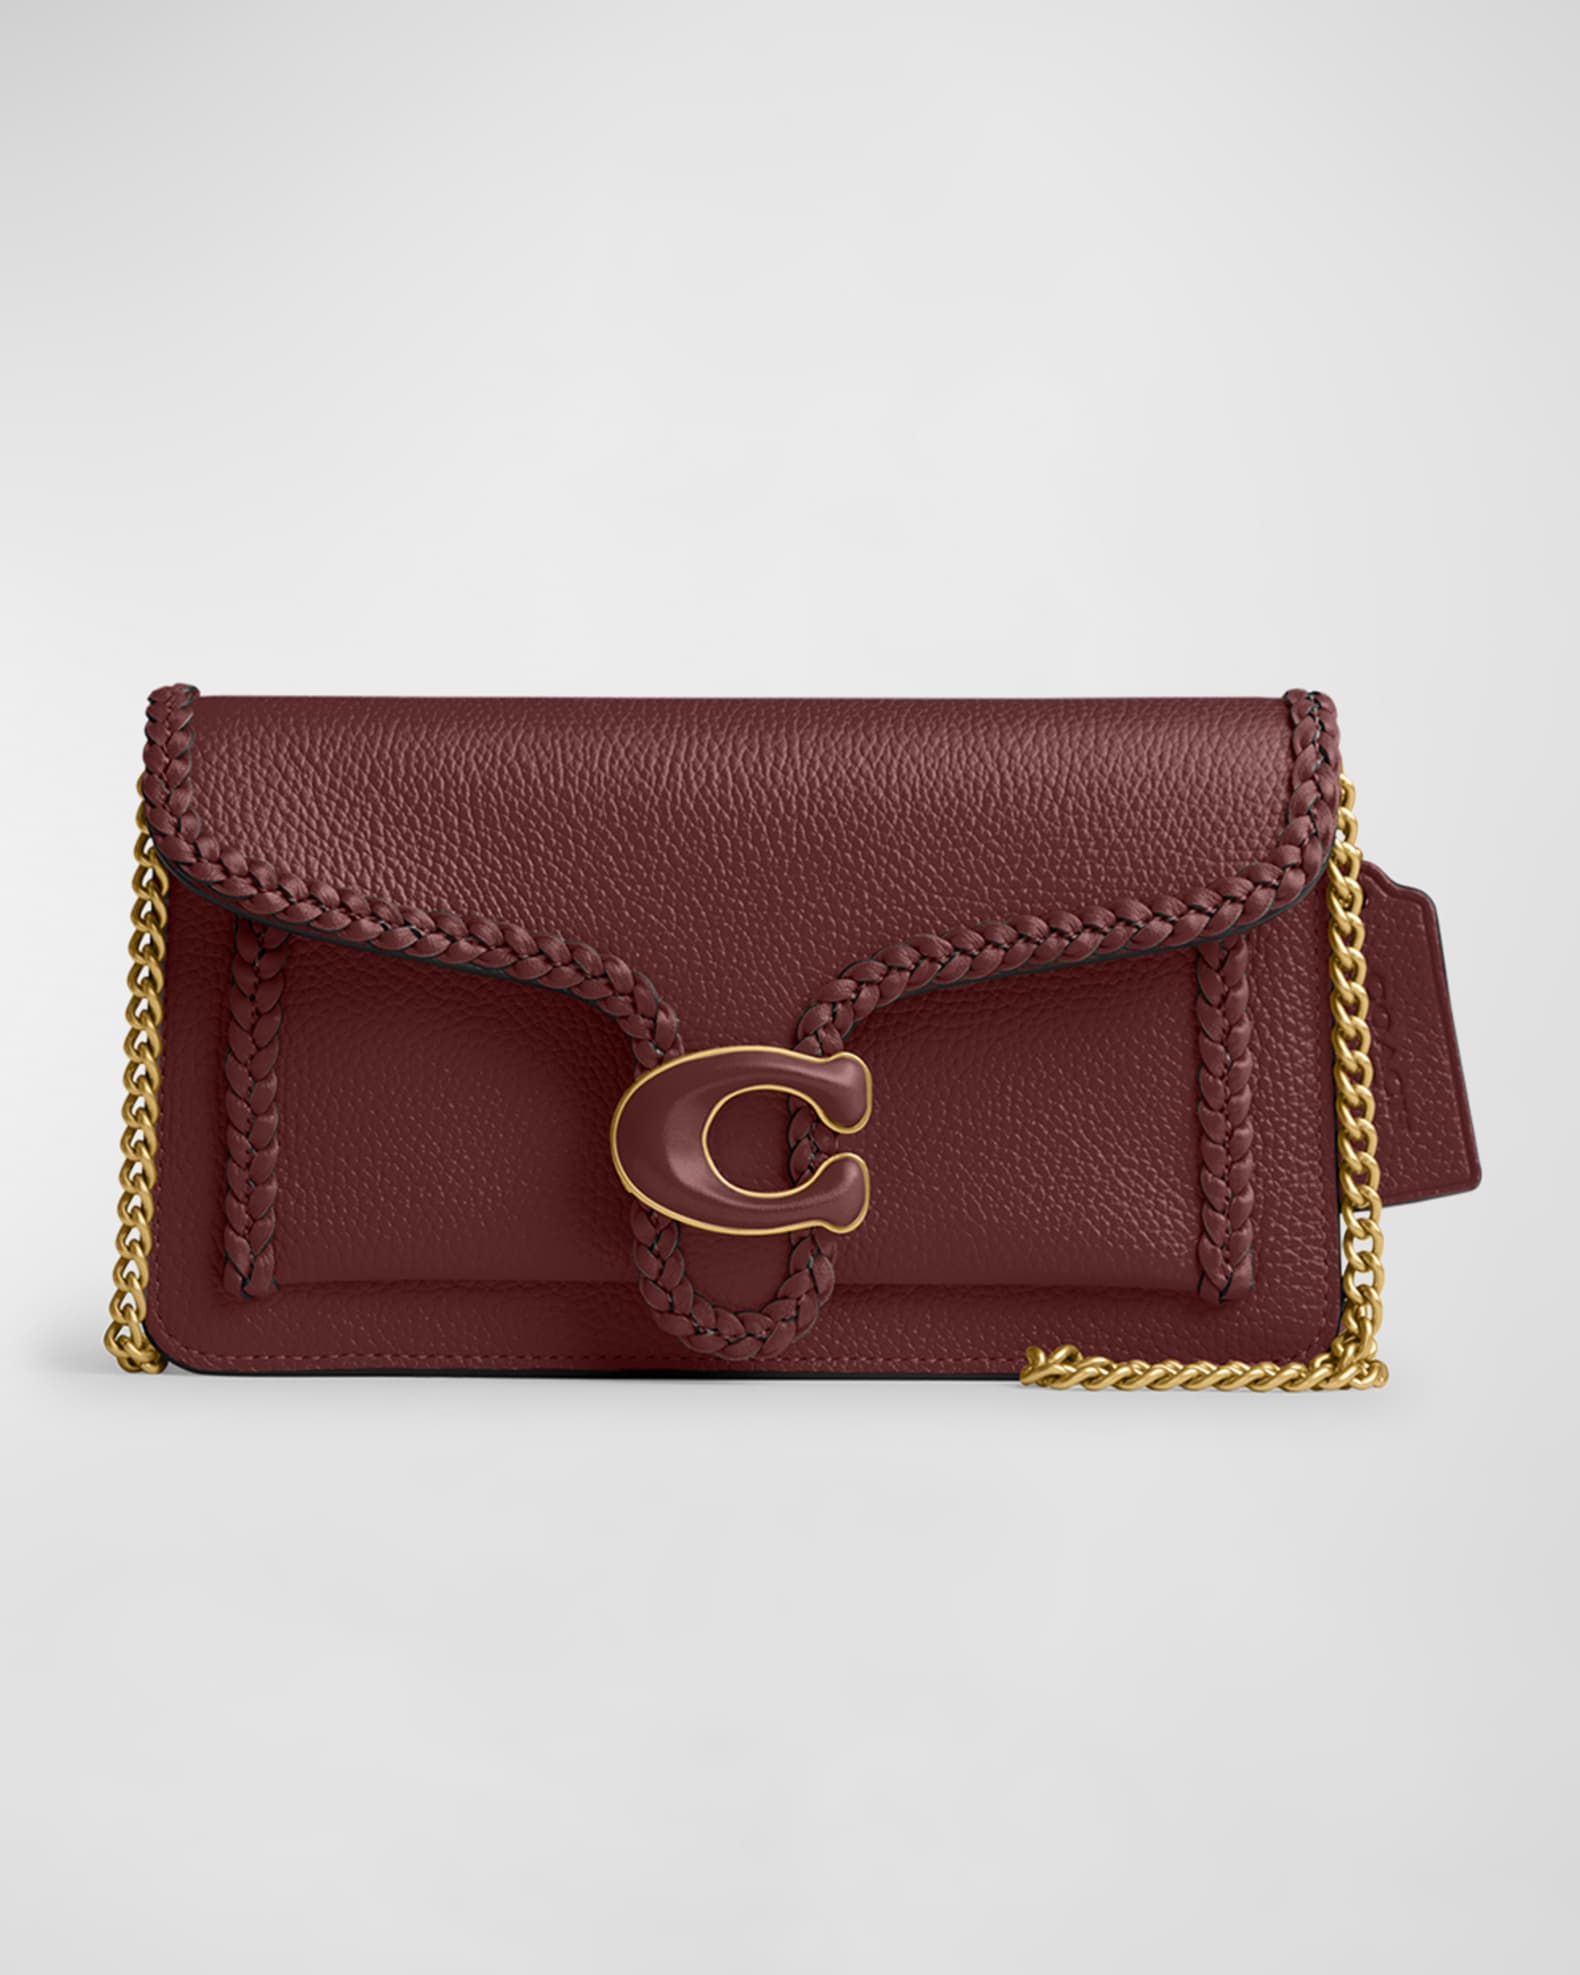 COACH Tabby Chain Clutch In Signature Canvas With Beadchain